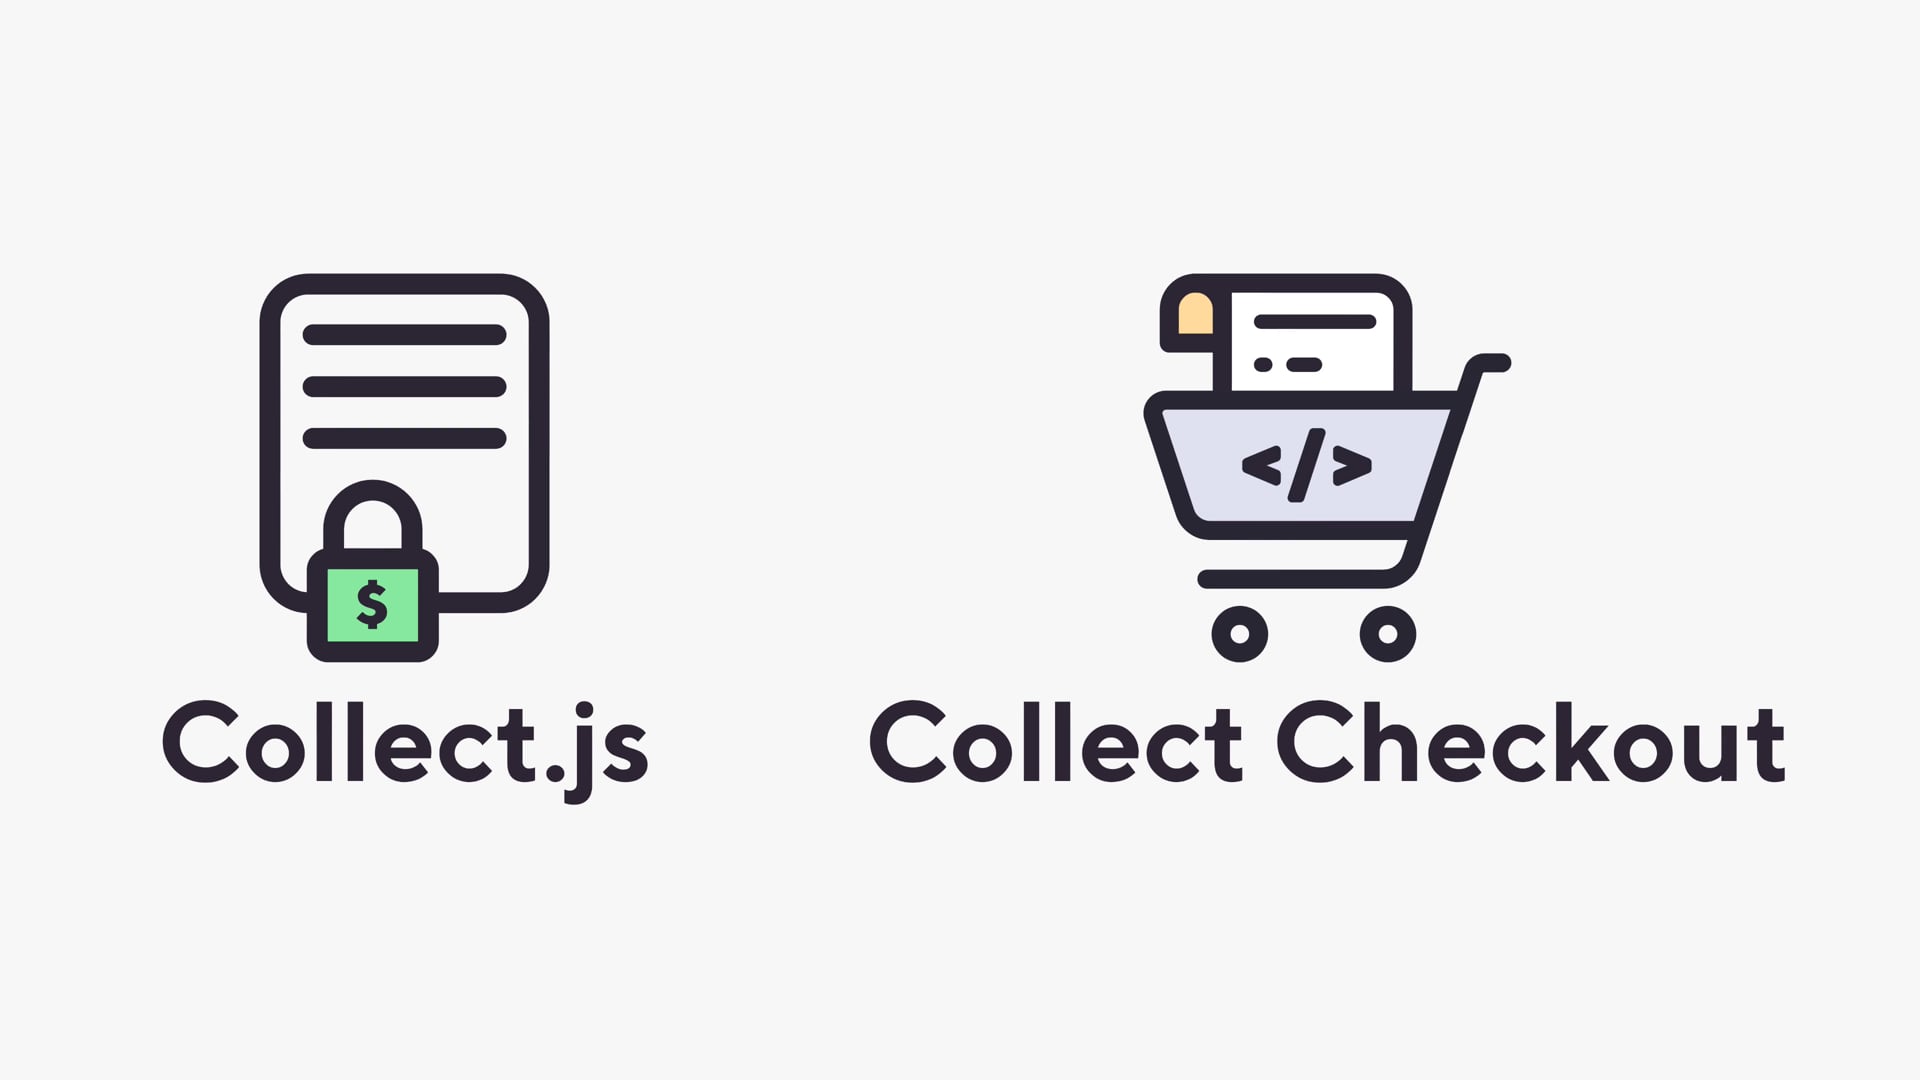 Choosing Between Collect.js and Collect Checkout